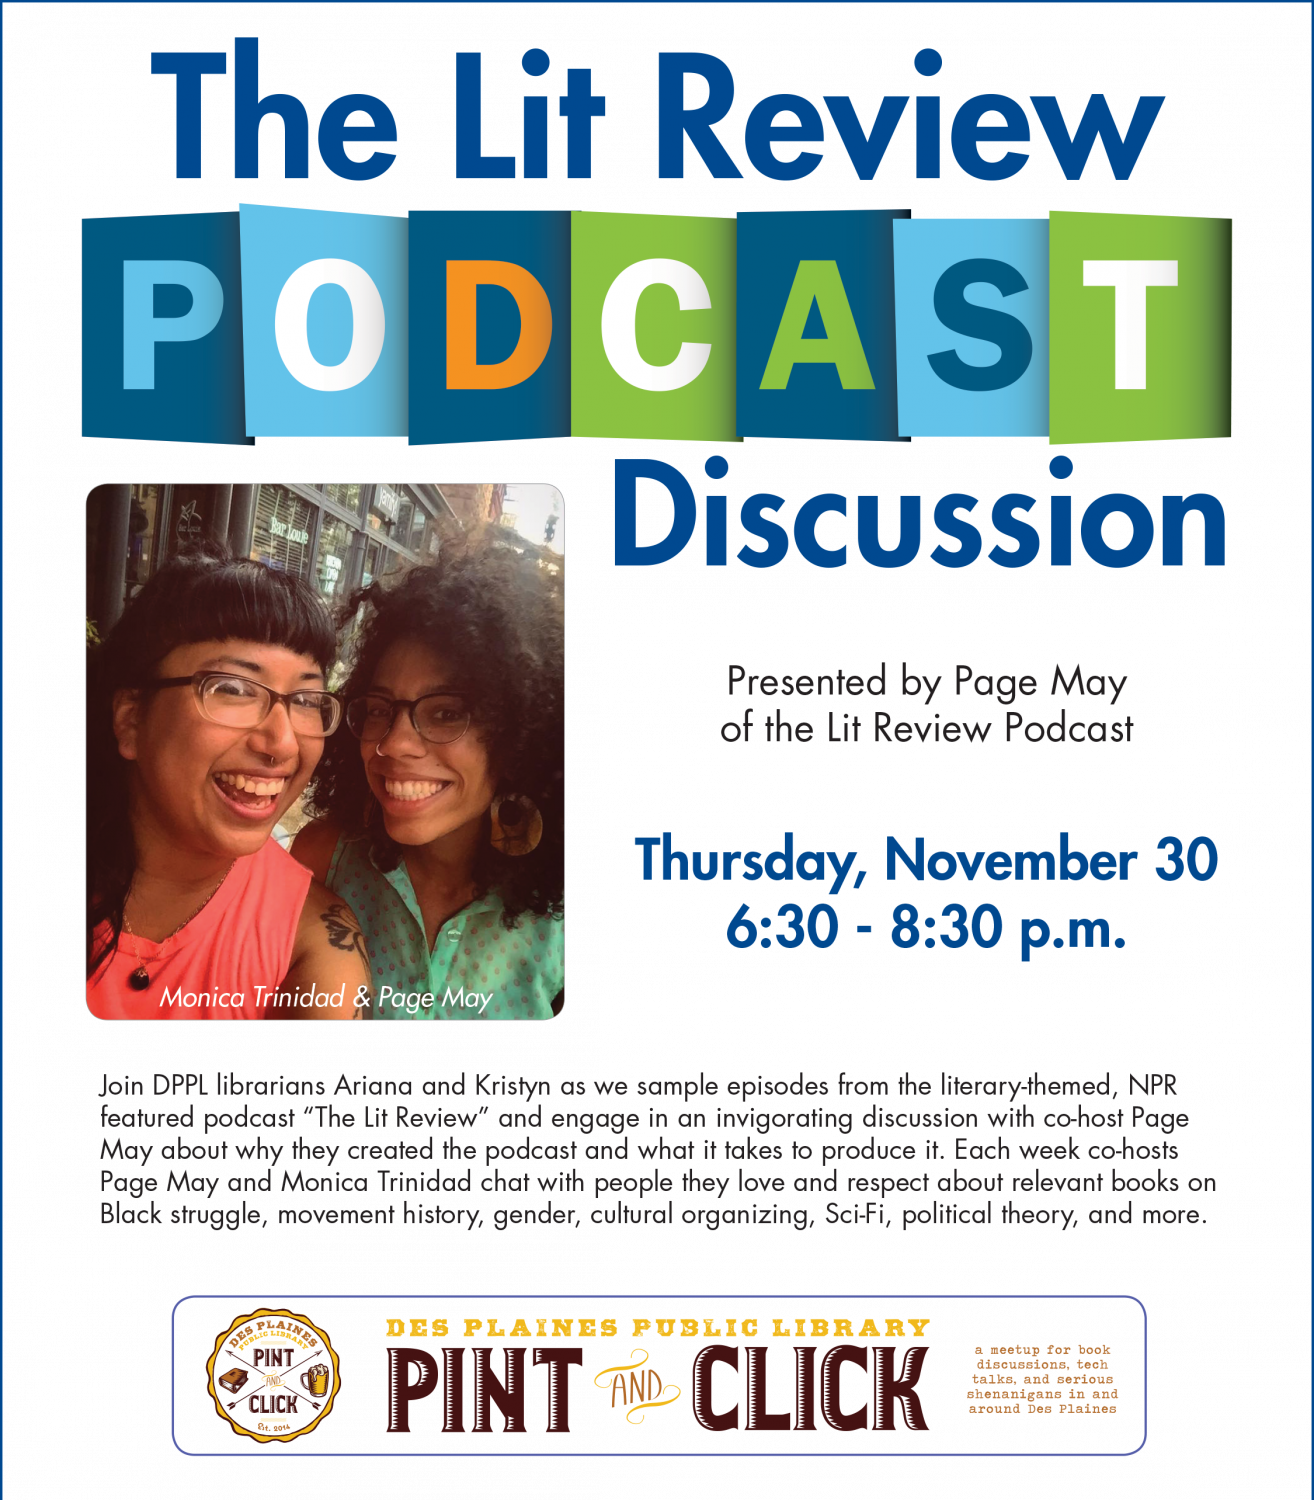 The Lit Review Podcast Discussion